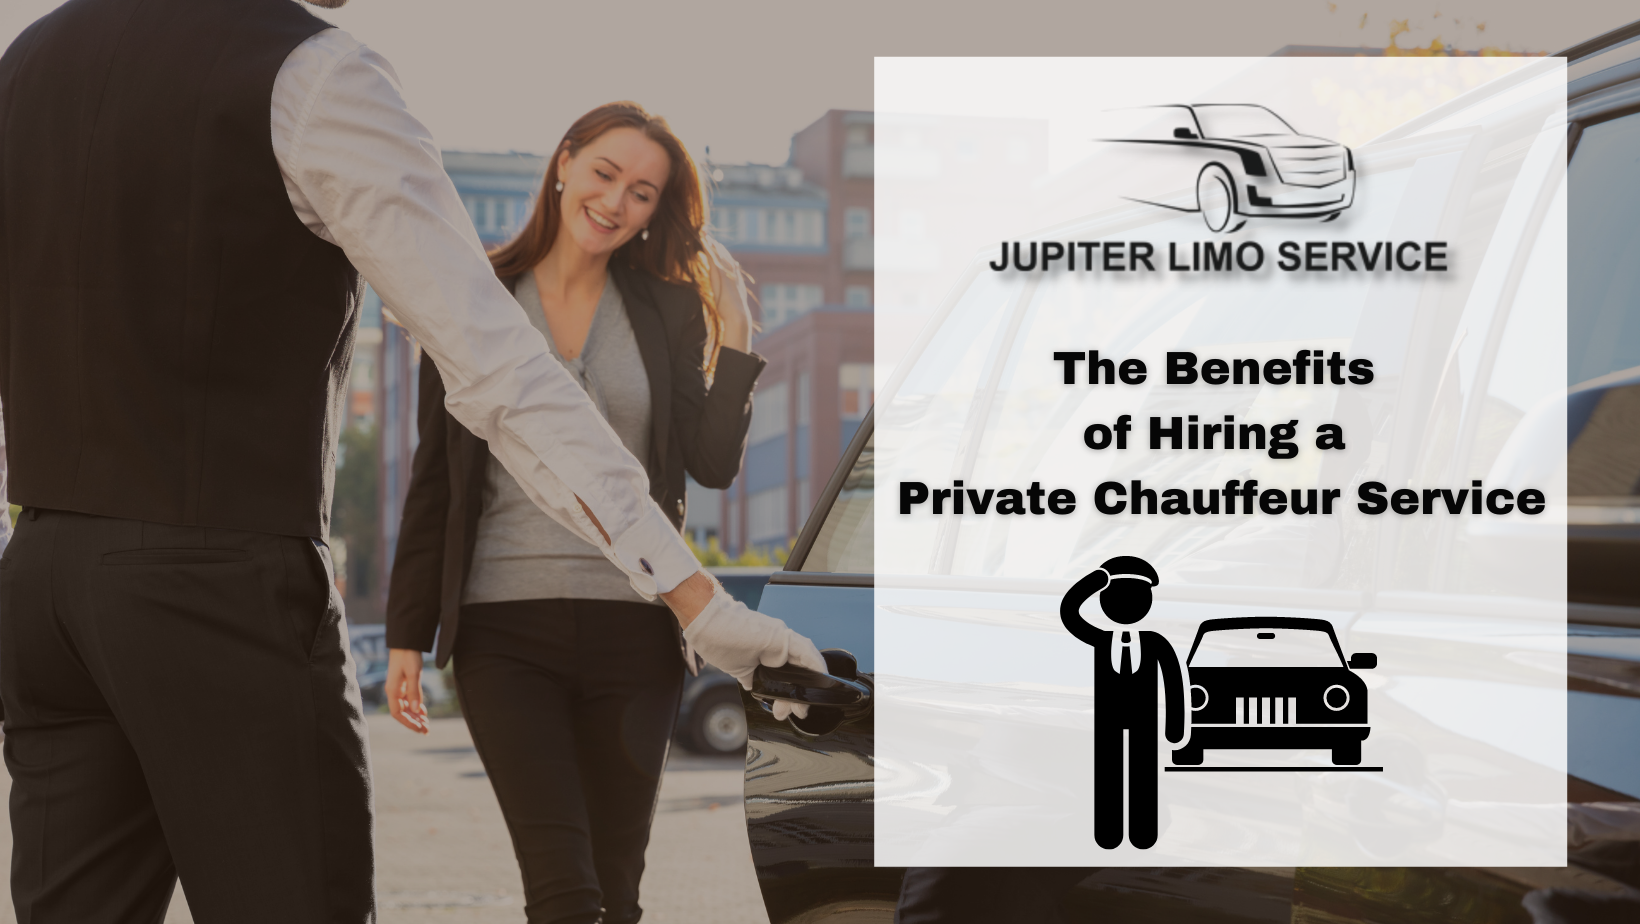 The Benefits of Hiring a Private Chauffeur Service